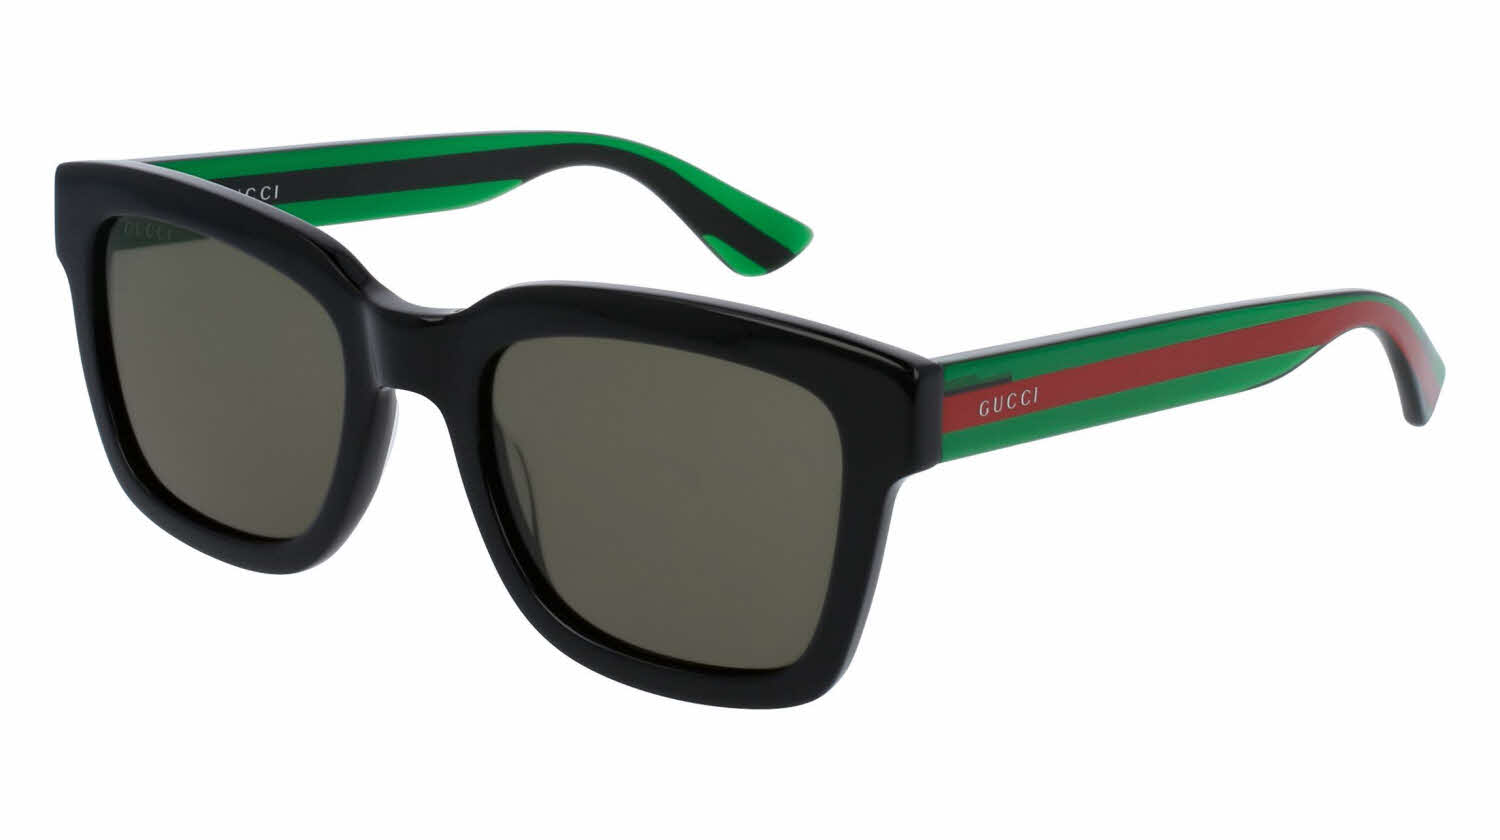 gucci sunglasses with green and red arms